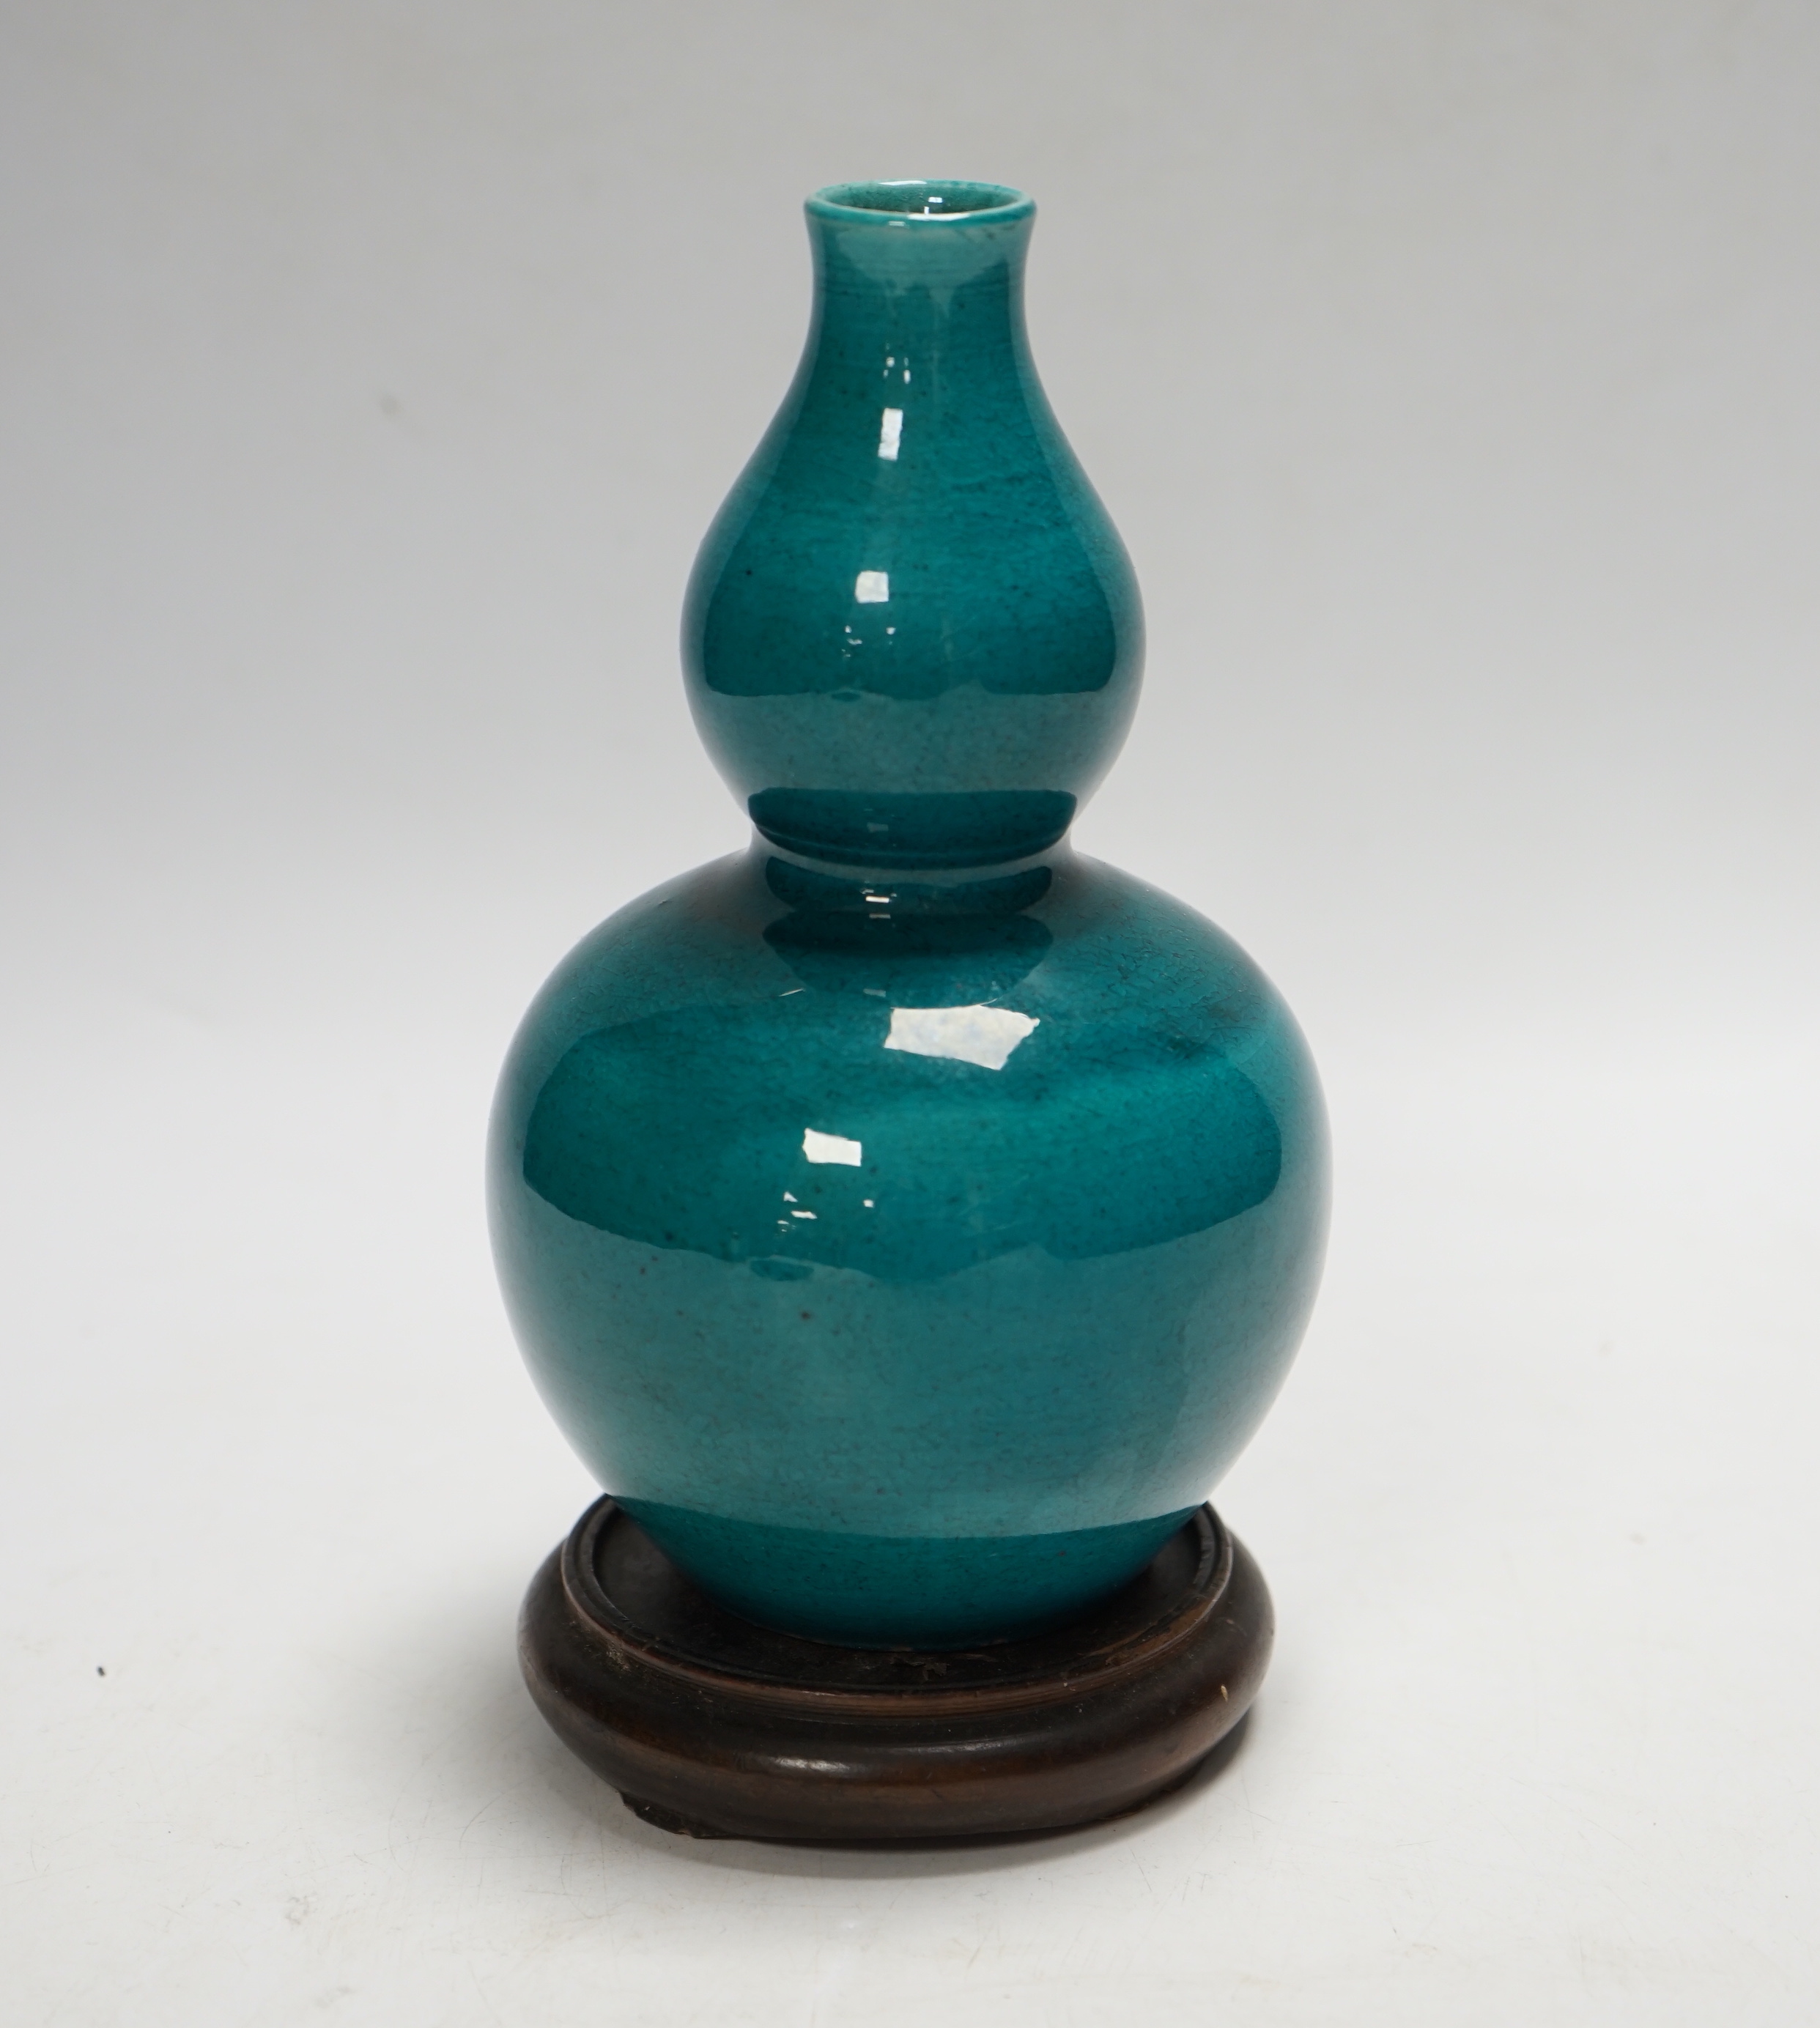 A Chinese turquoise glazed double gourd vase, on stand, 17cm